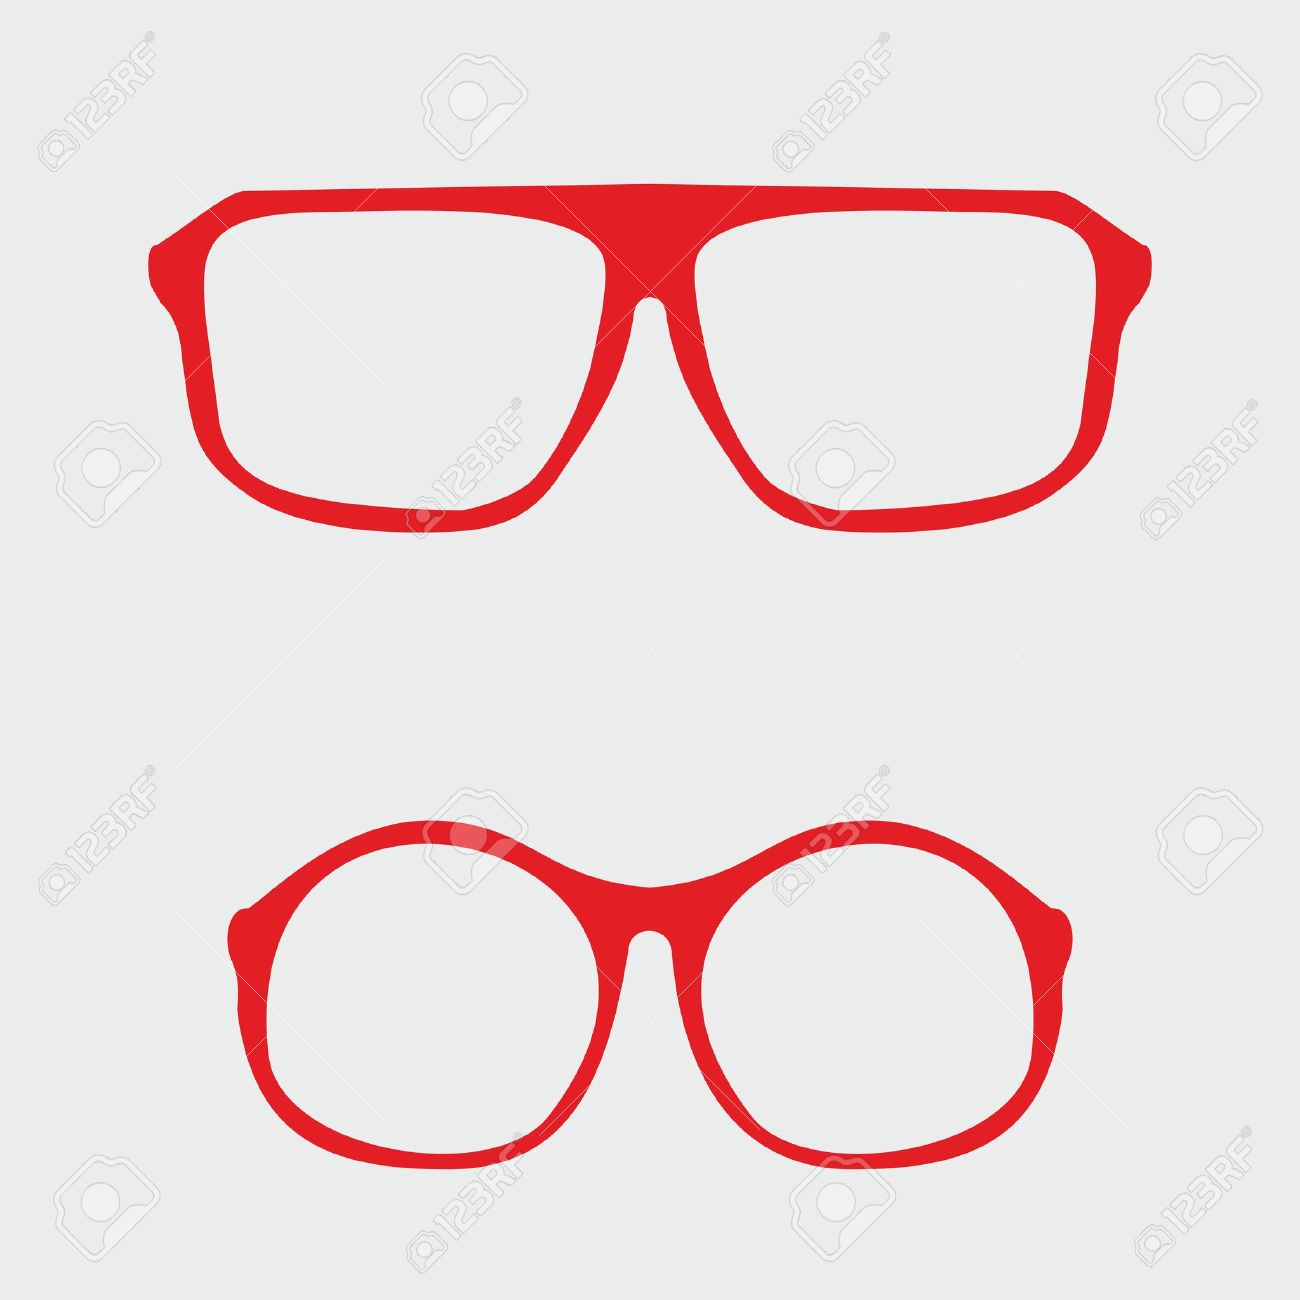 Free Red Glasses Cliparts, Download Free Clip Art, Free Clip